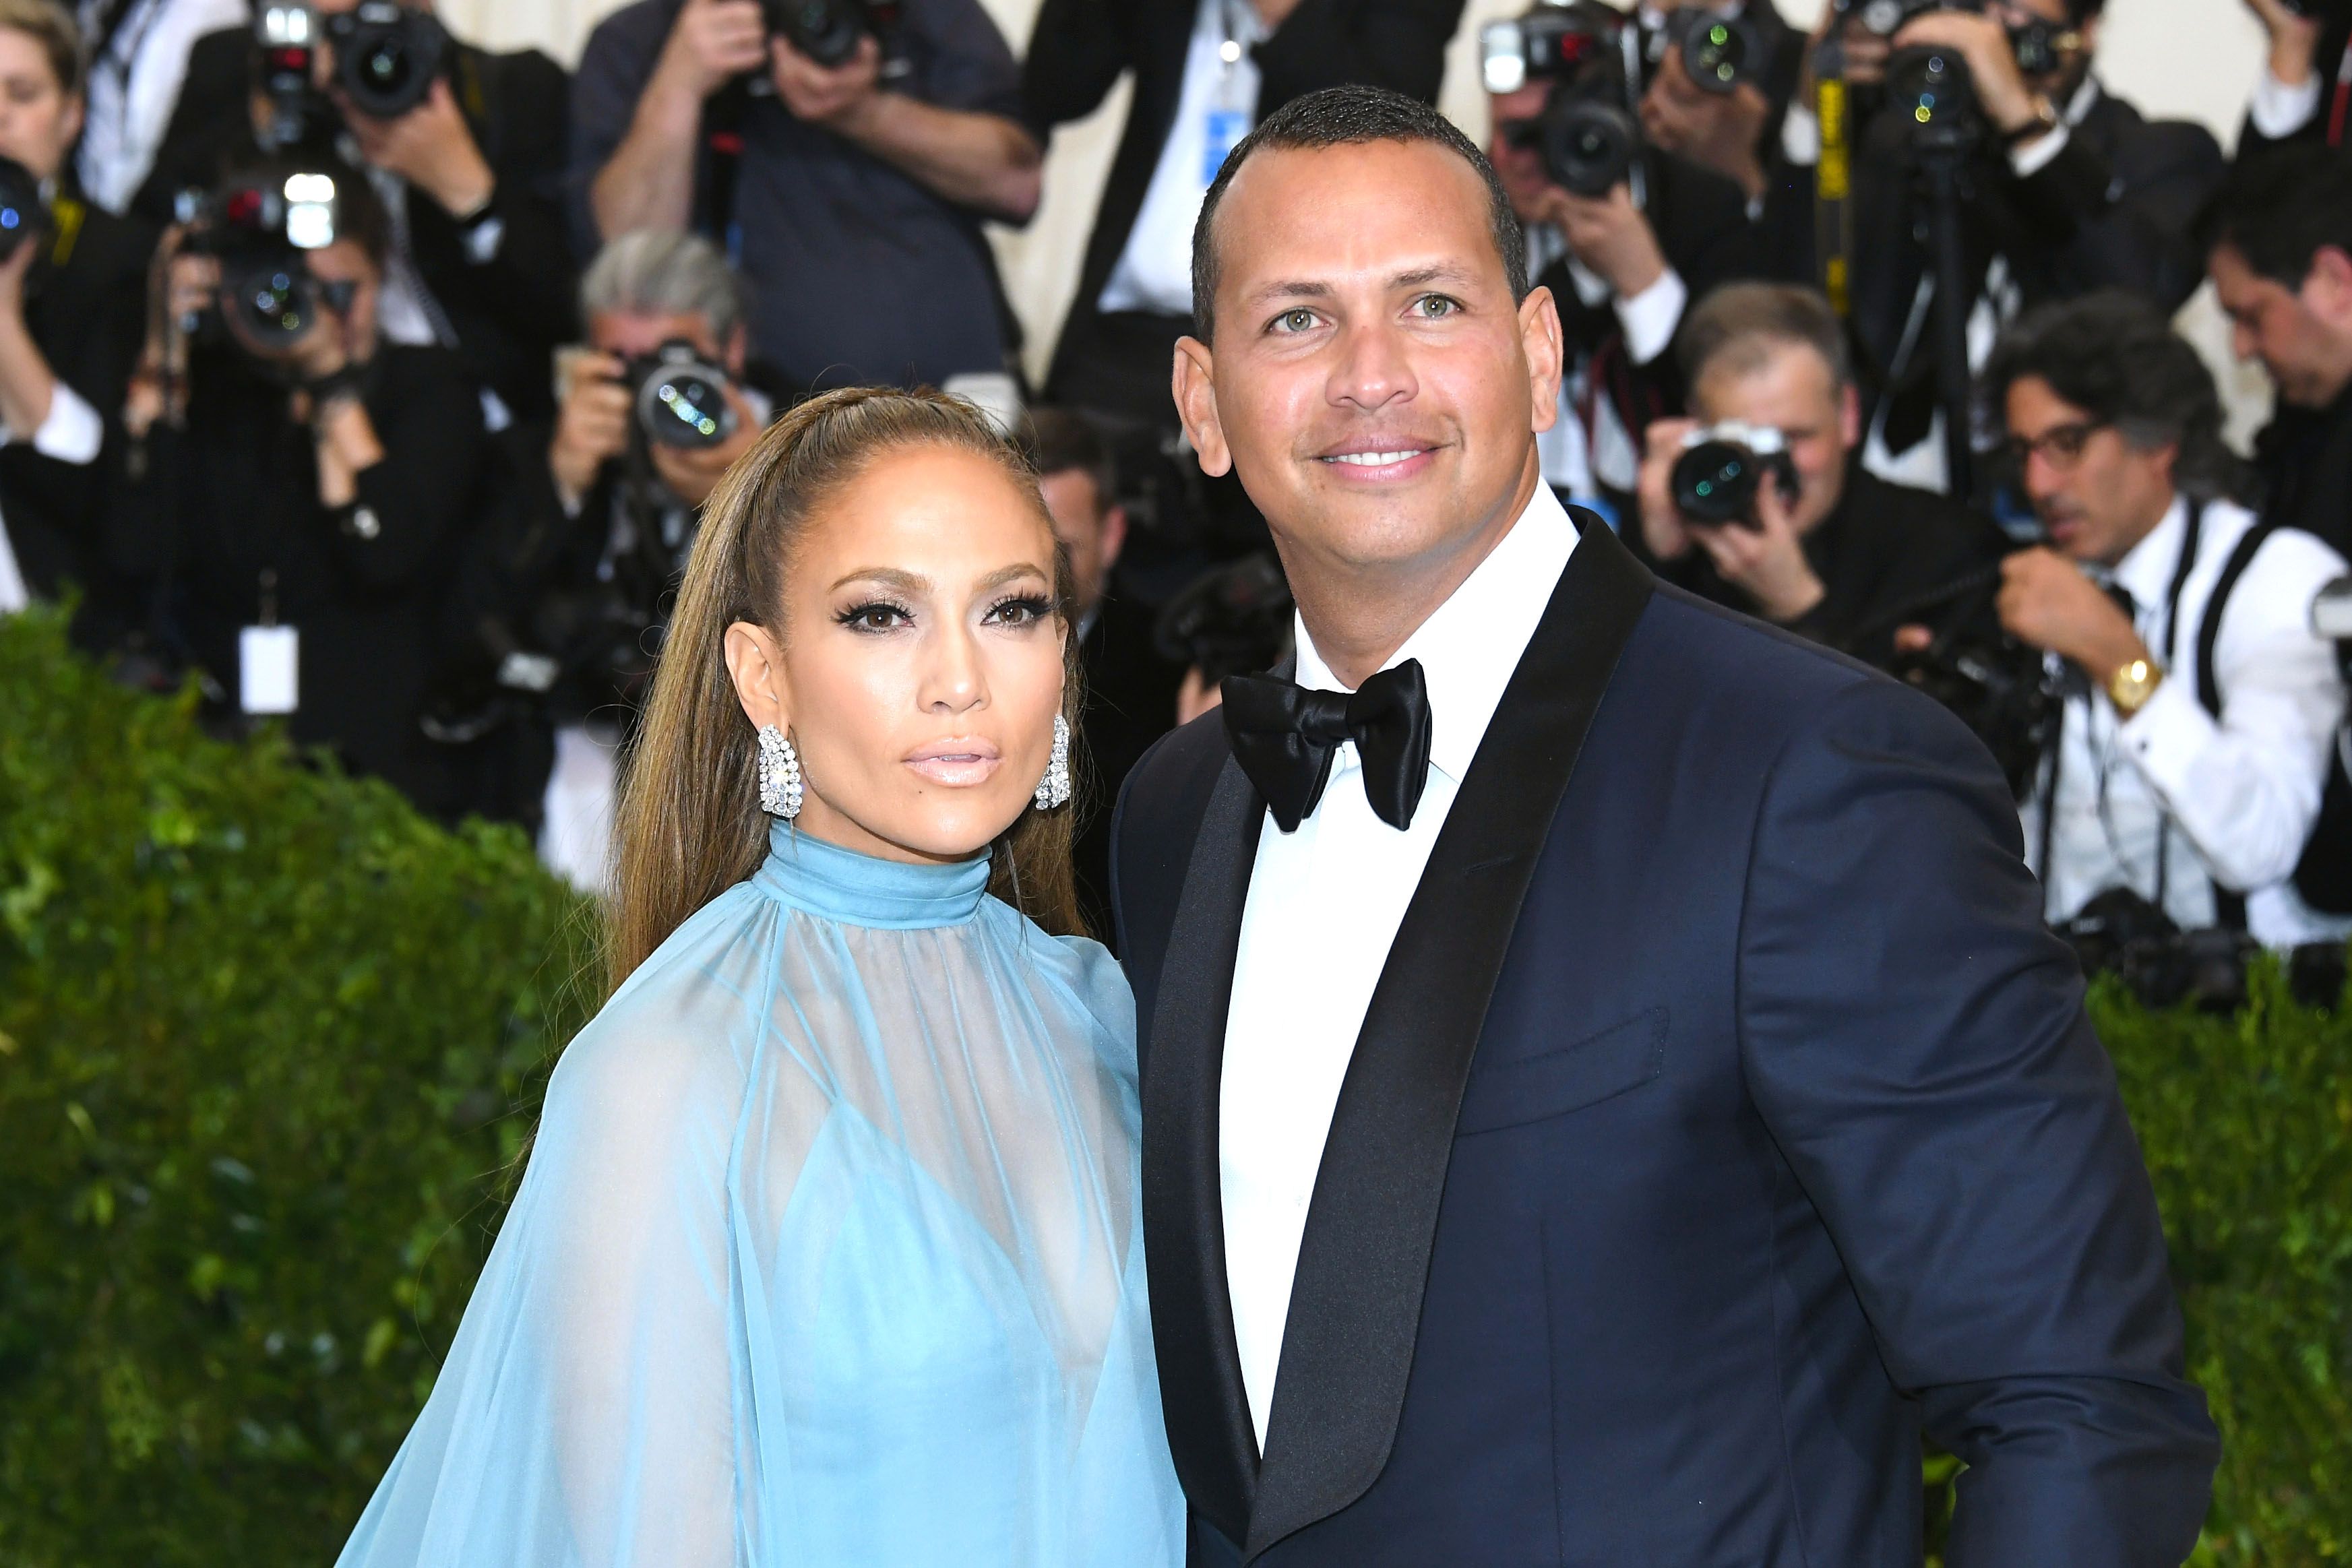 Jose Canseco Accuses Alex Rodriguez Of Cheating On Jennifer Lopez